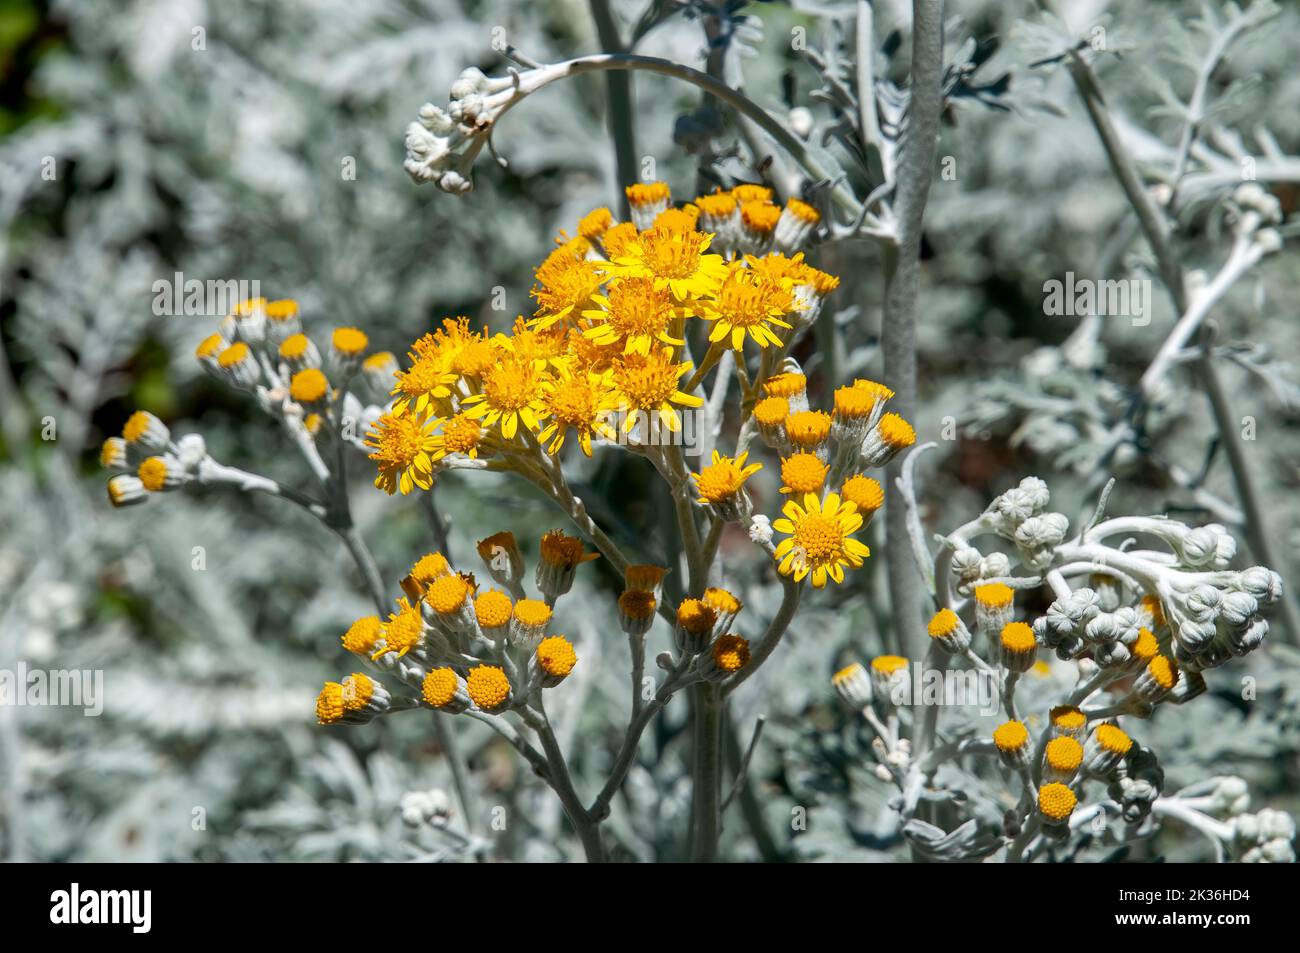 Sydney Australia, yellow flowers of a dusty miller plant in garden bed Stock Photo